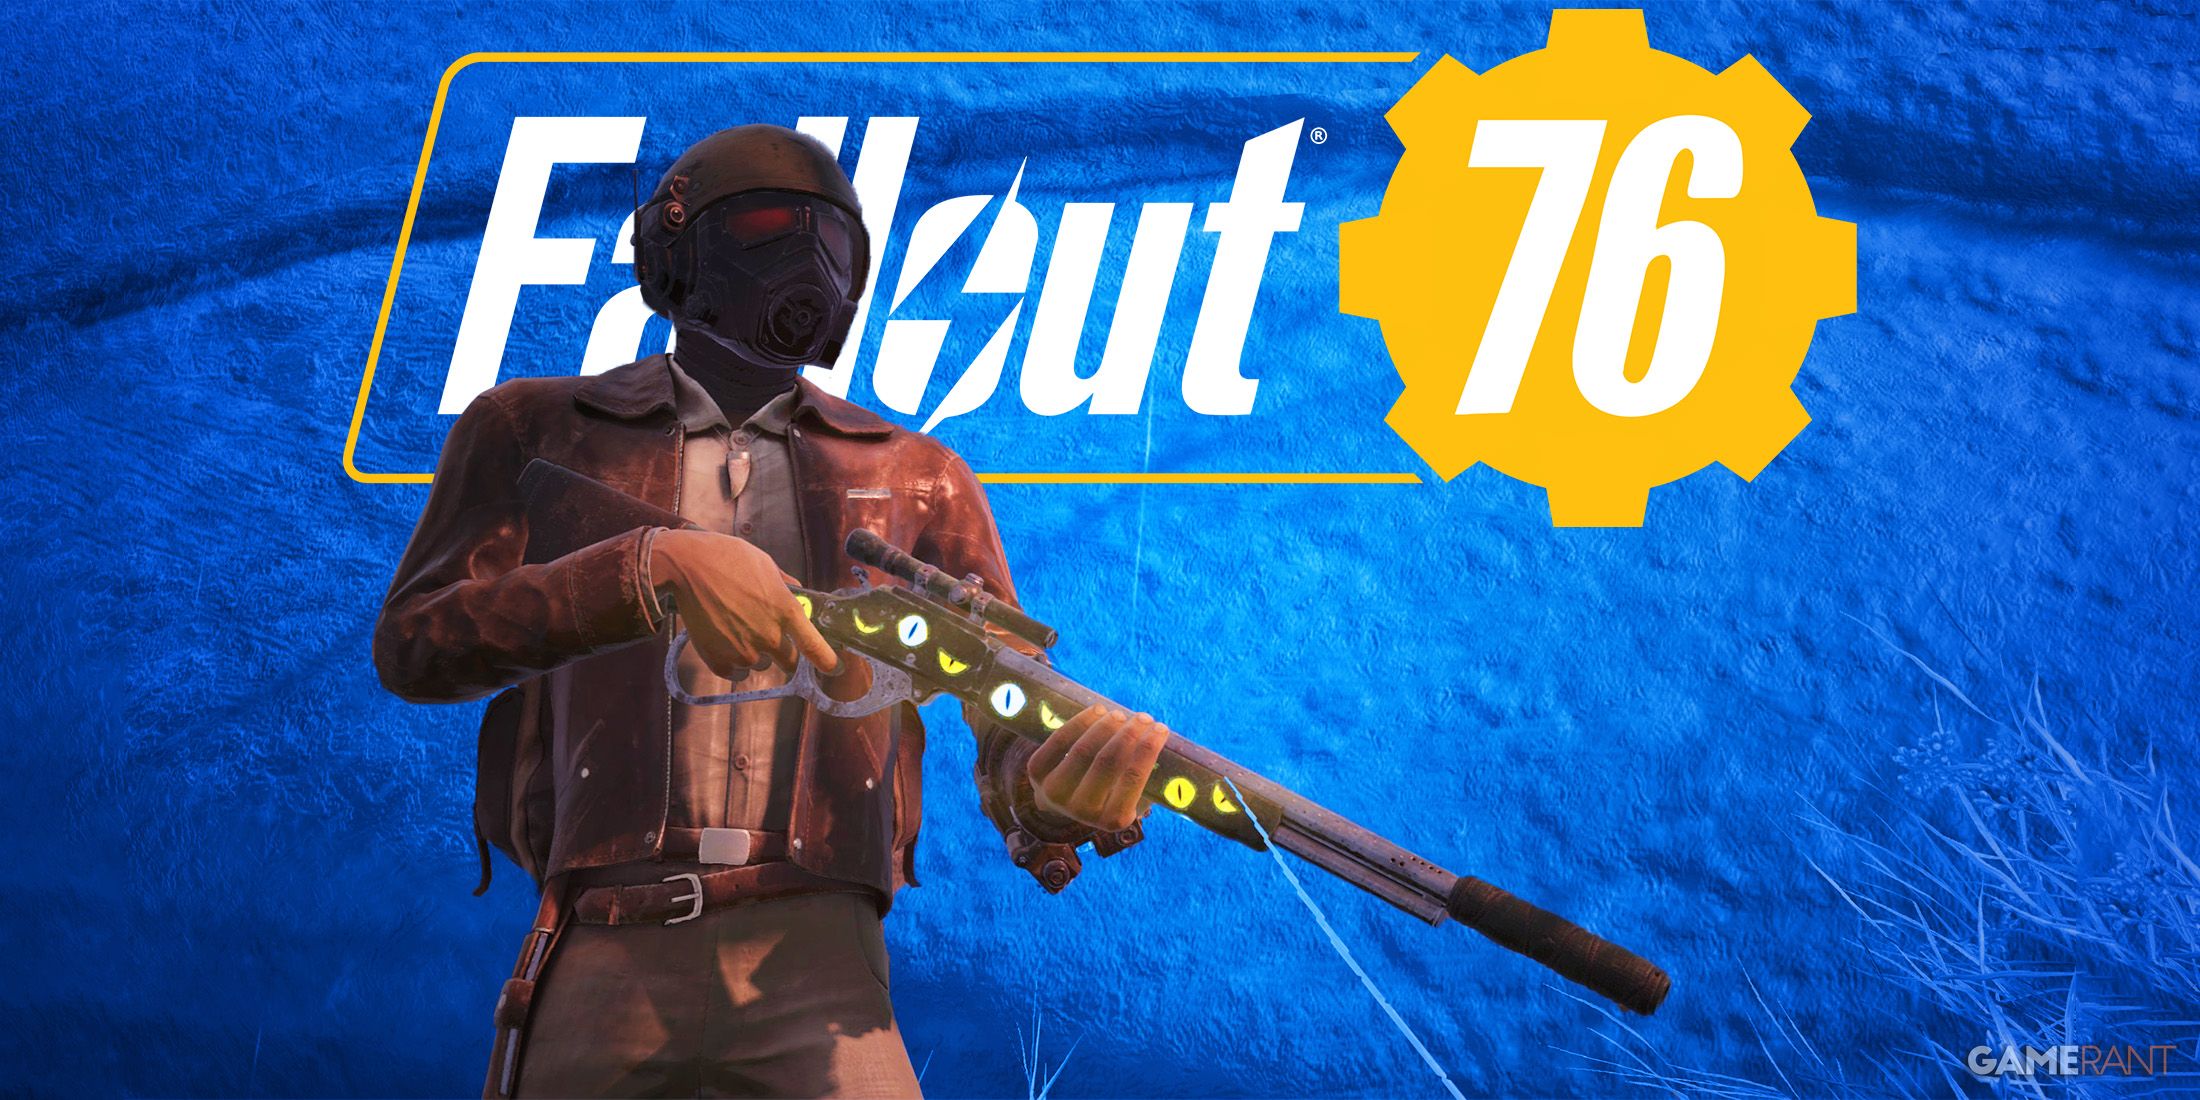 Fallout 76 Lever-action rifle player standing below game logo on blue background with helmet composite